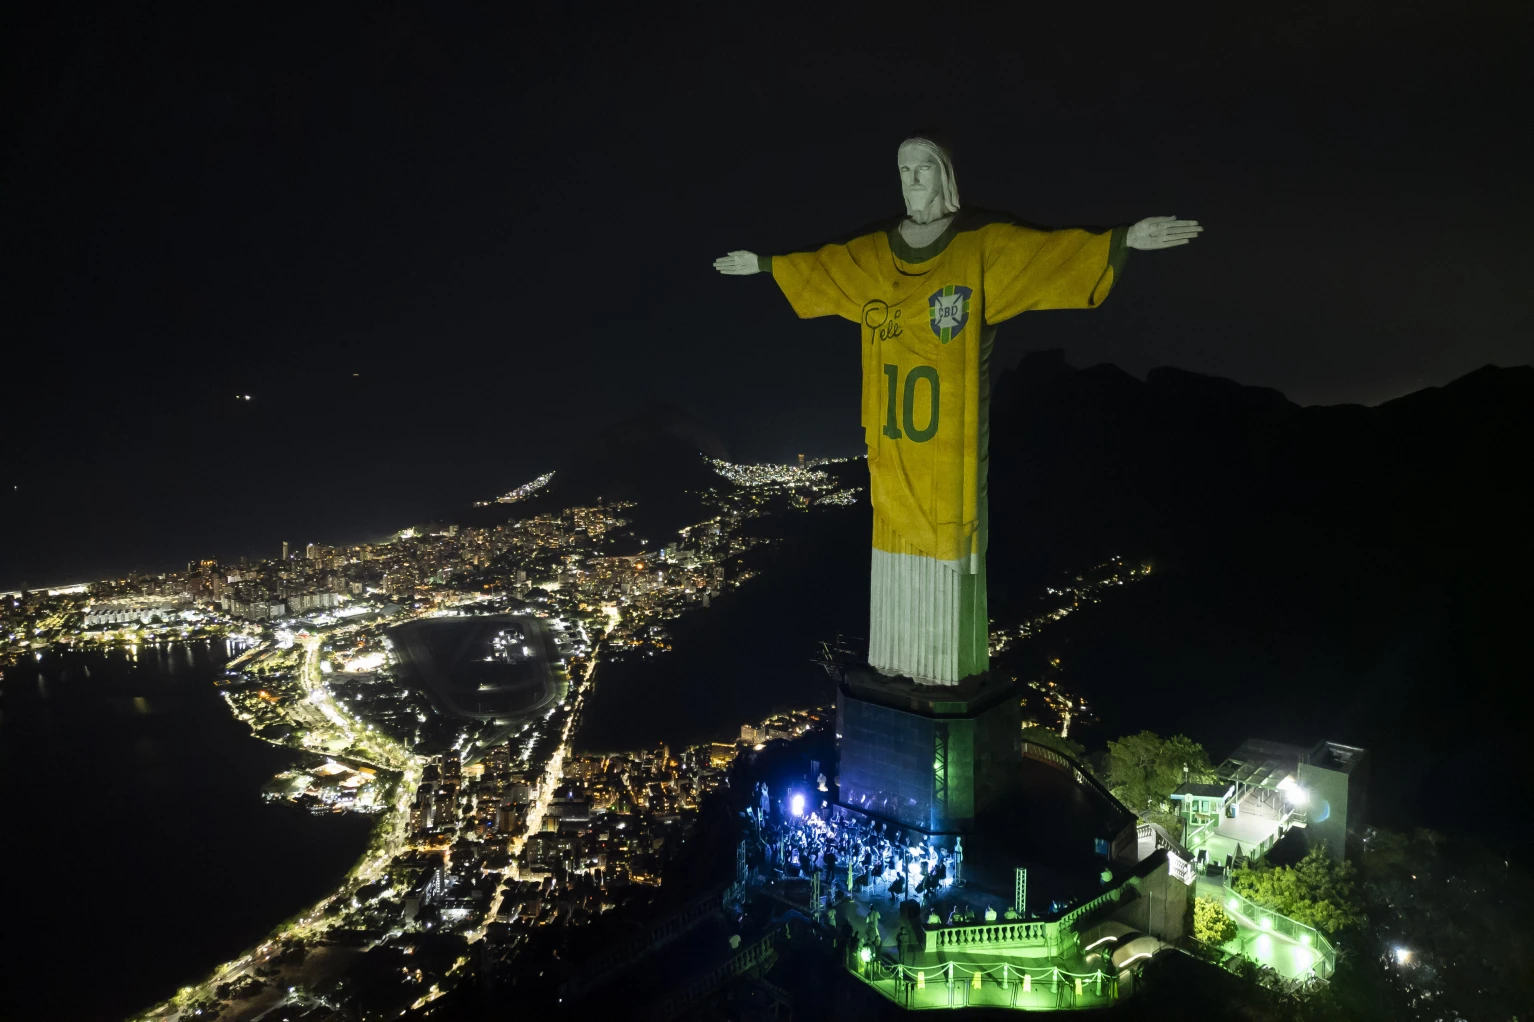 How Brazil remembered soccer wizard Pelé one year after his death, Christ the redeemer wore his No.10